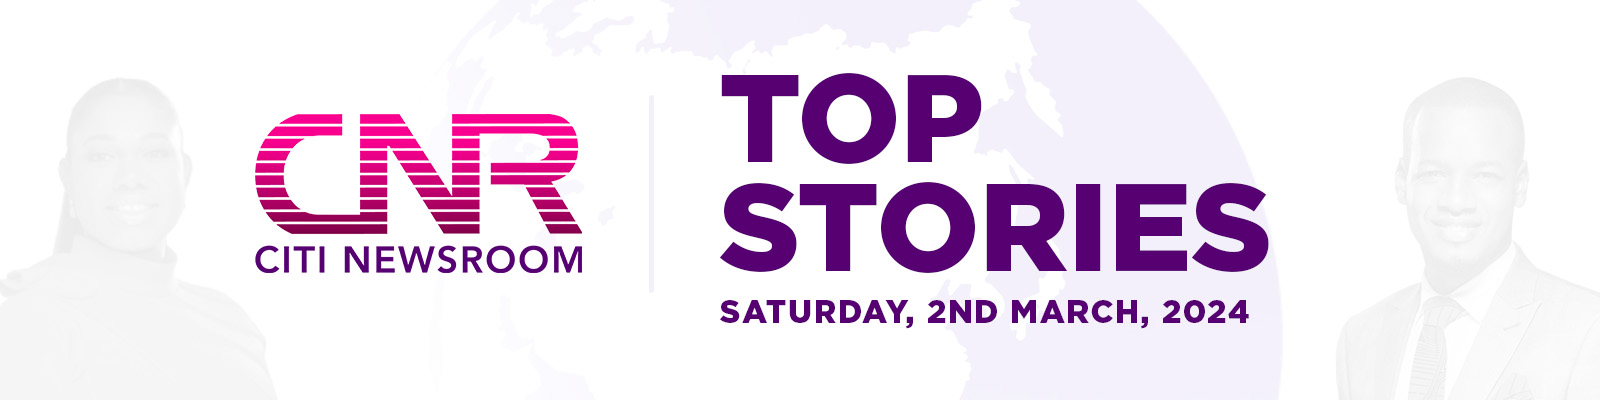 TOP Stories 2nd March, 2024